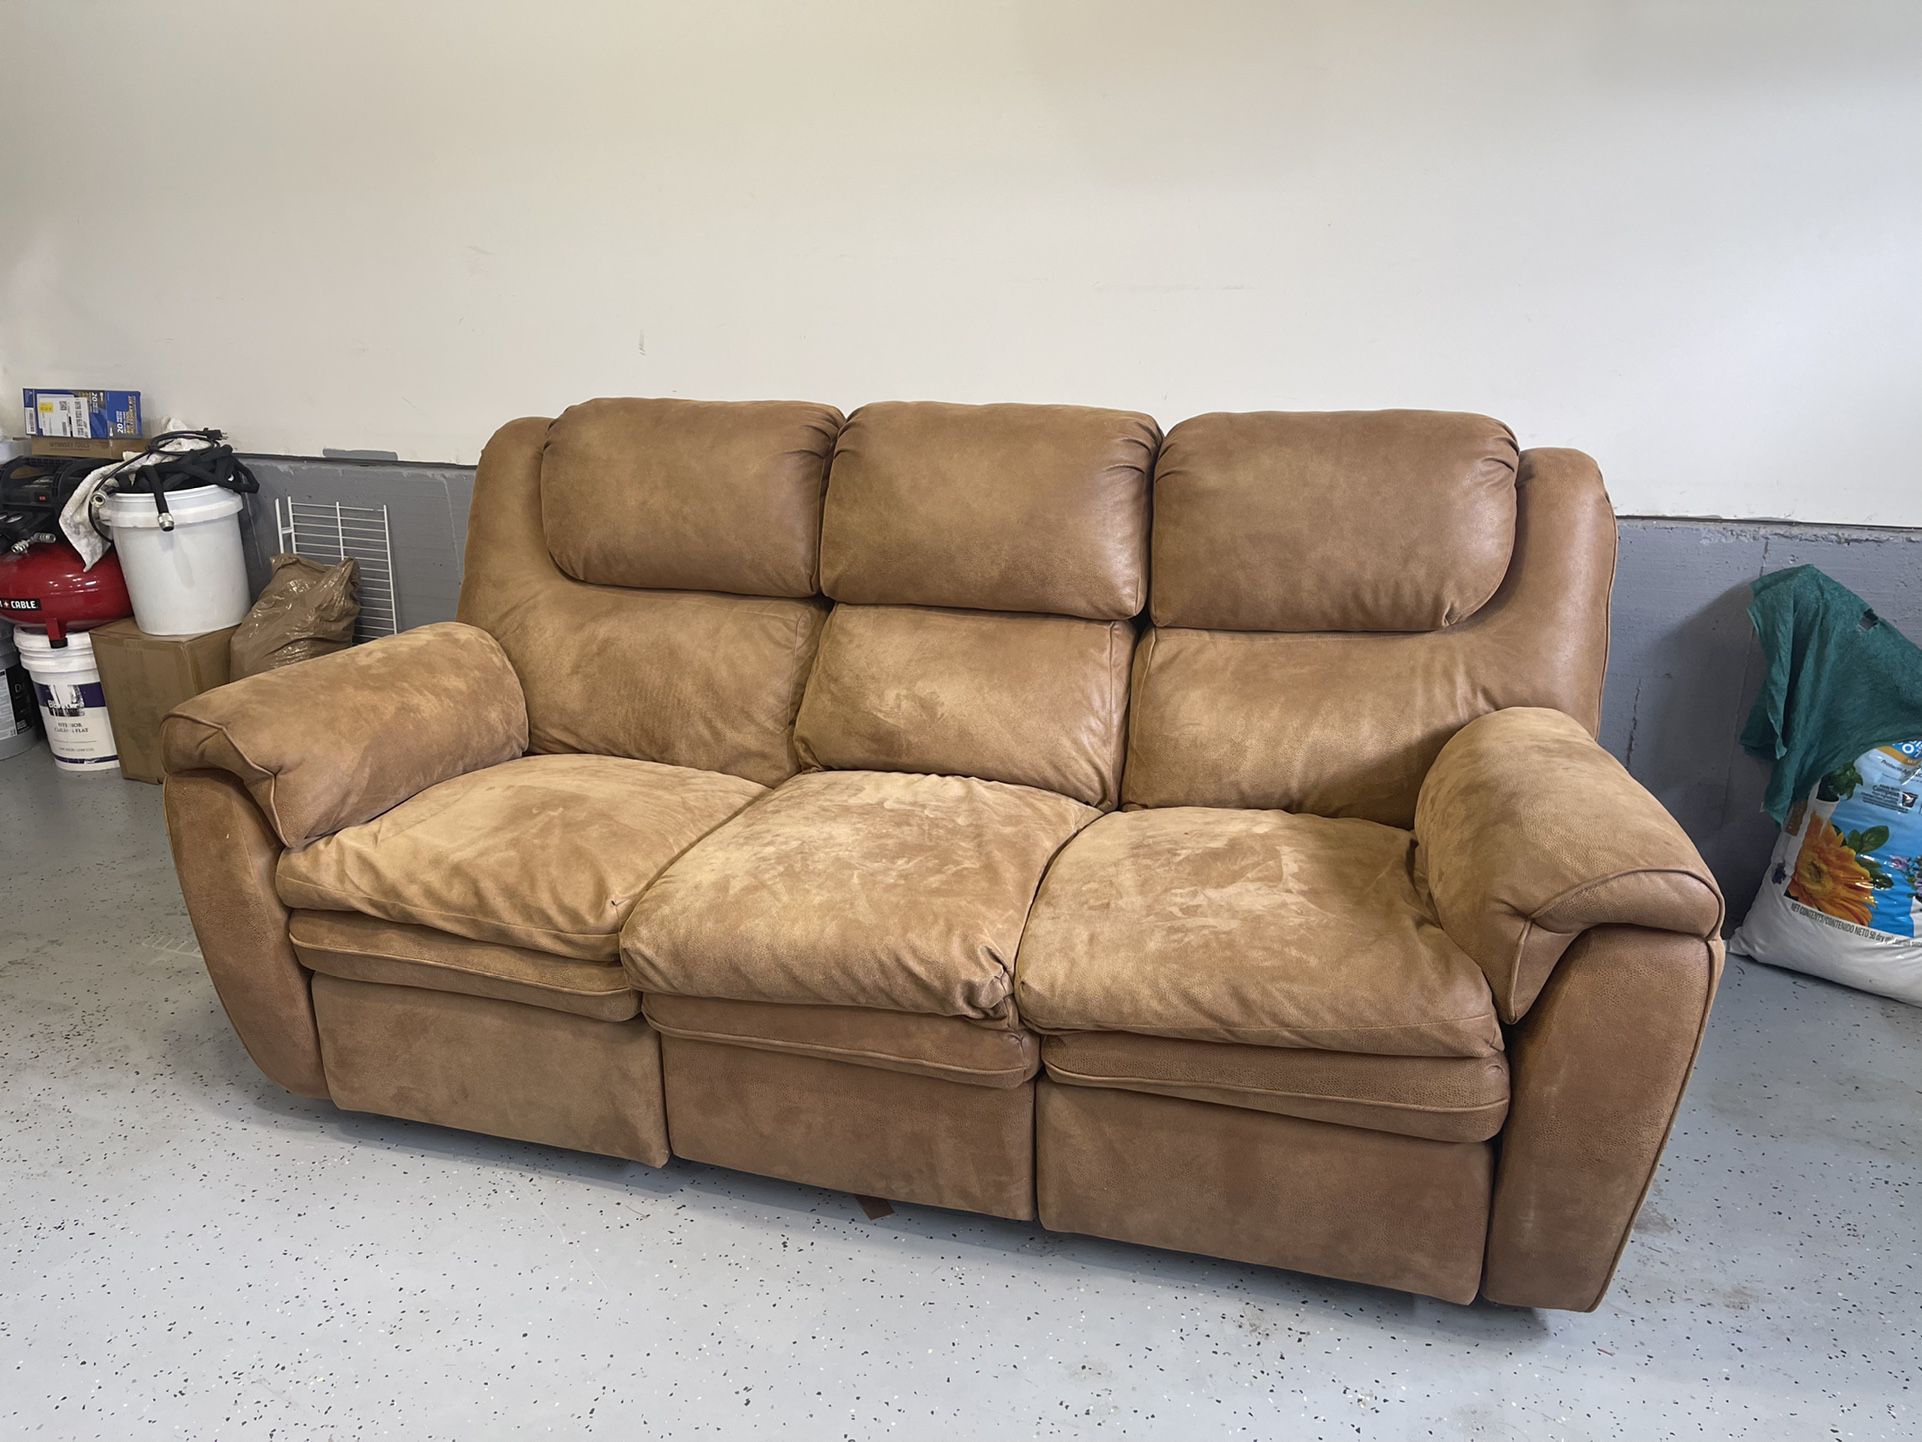 Recliner Couch With Storage (Best Offer)